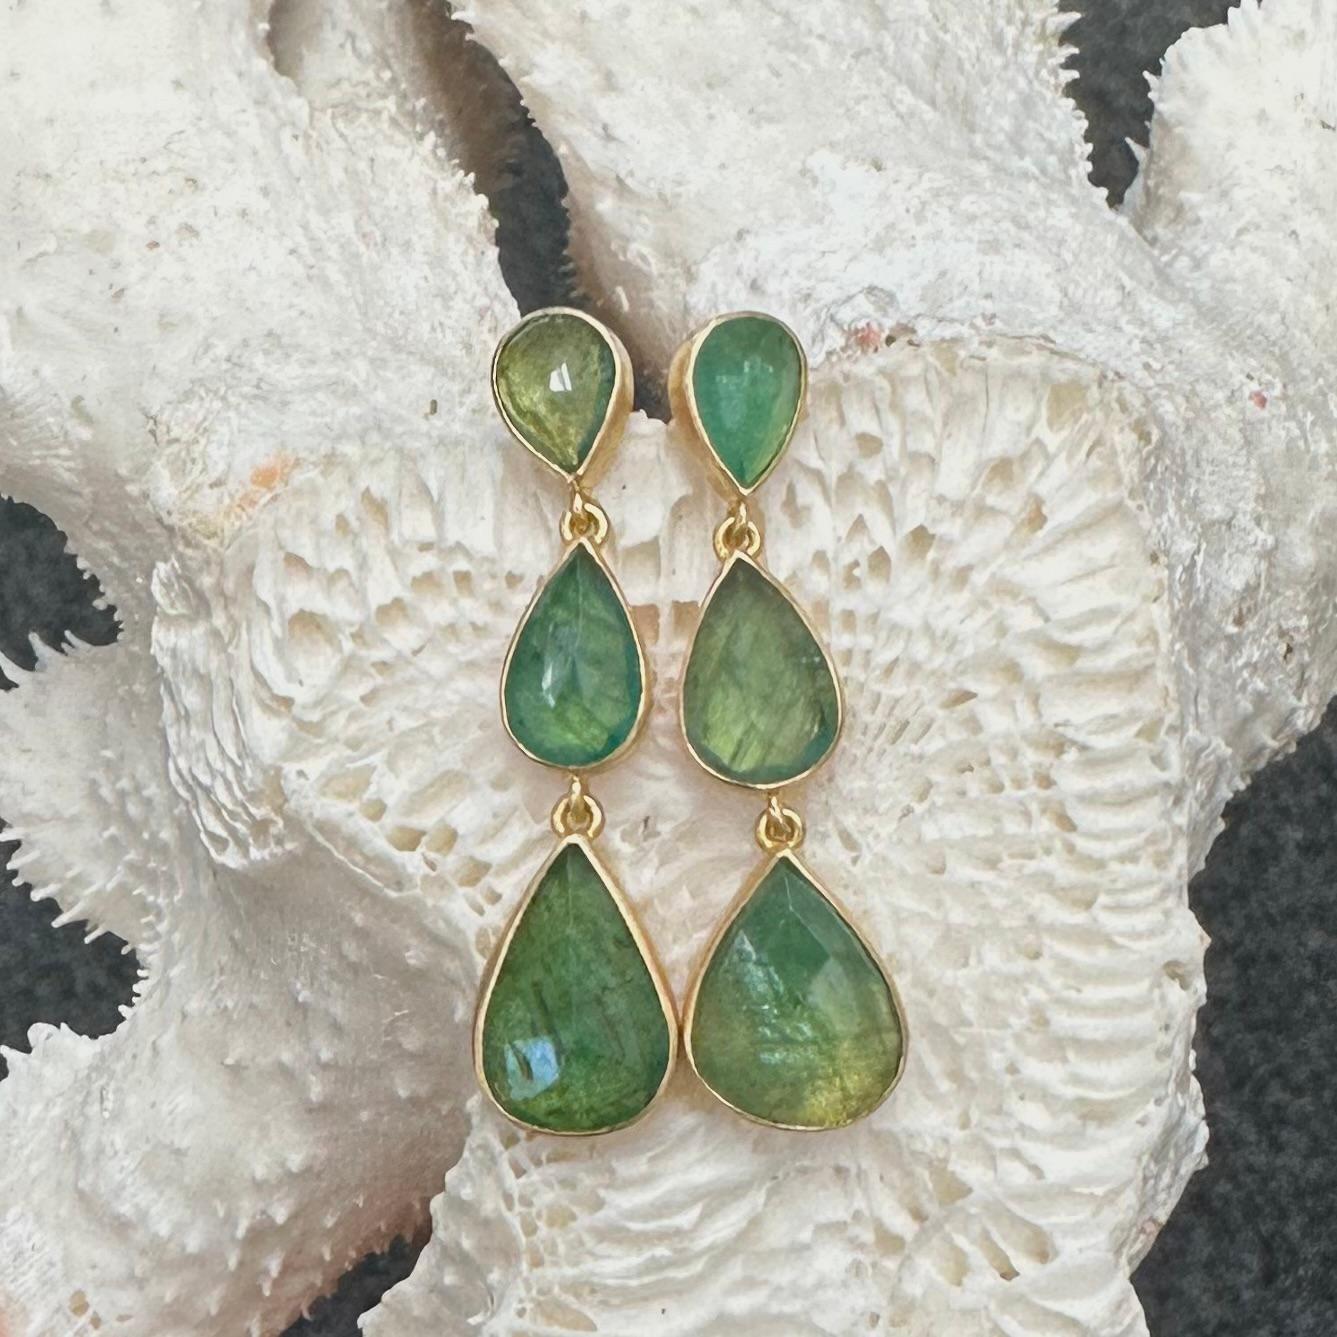 Six pear shaped rose faceted Zambian emeralds ranging in size from 6 x 8 mm to 9 x 14 mm are set in simple handcrafted matte-finish 18K gold bezels with the gold backs reflecting lots of light back though the stones.  Sometimes there is nothing that